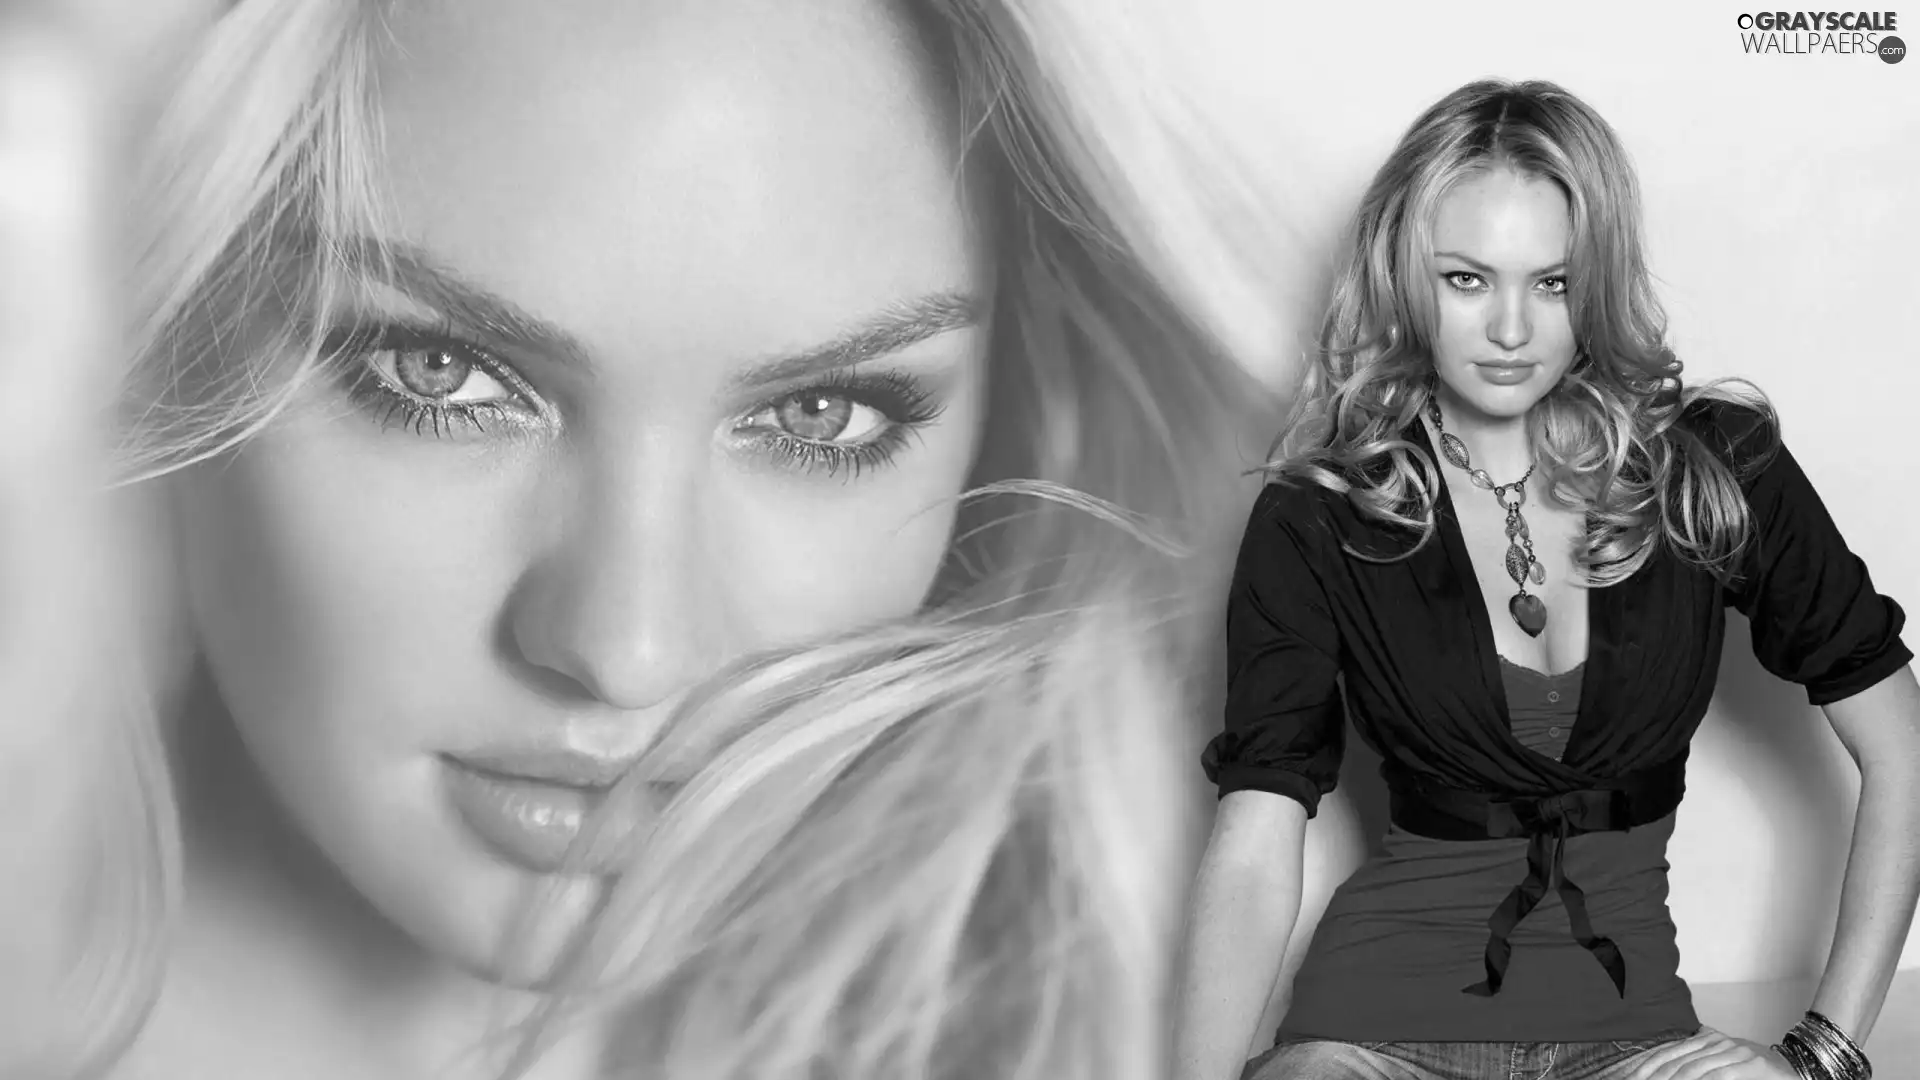 The look, Candice Swanepoel, Blonde